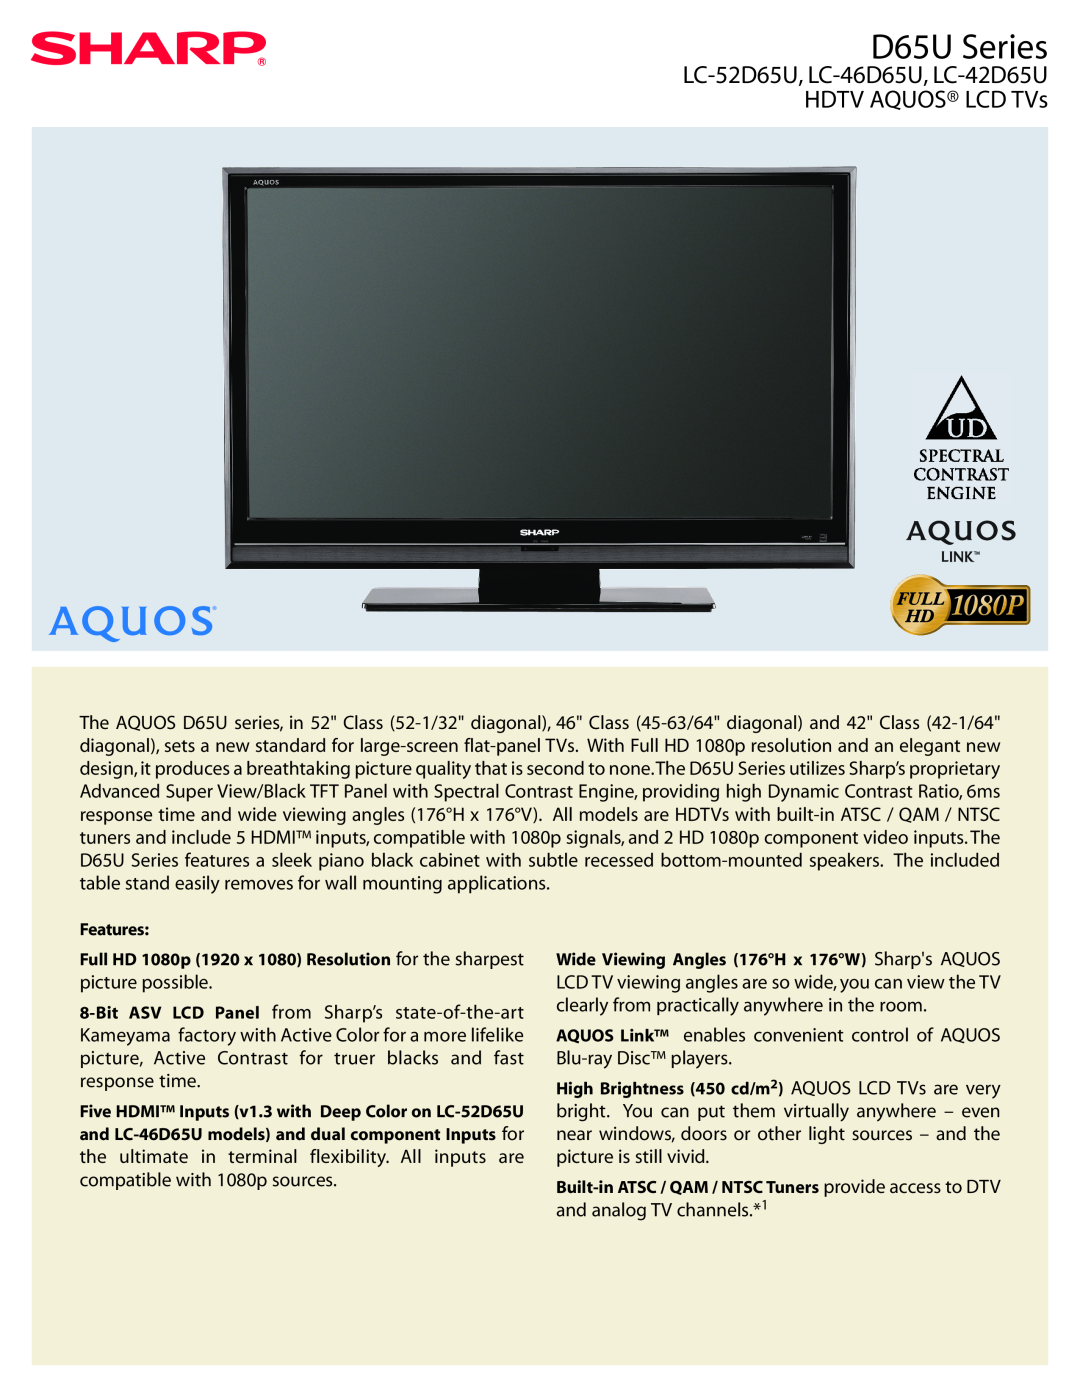 Sharp D65U Series manual LC-52D65U, LC-46D65U, LC-42D65U HDTV AQUOS LCD TVs, and analog TV channels.*1 